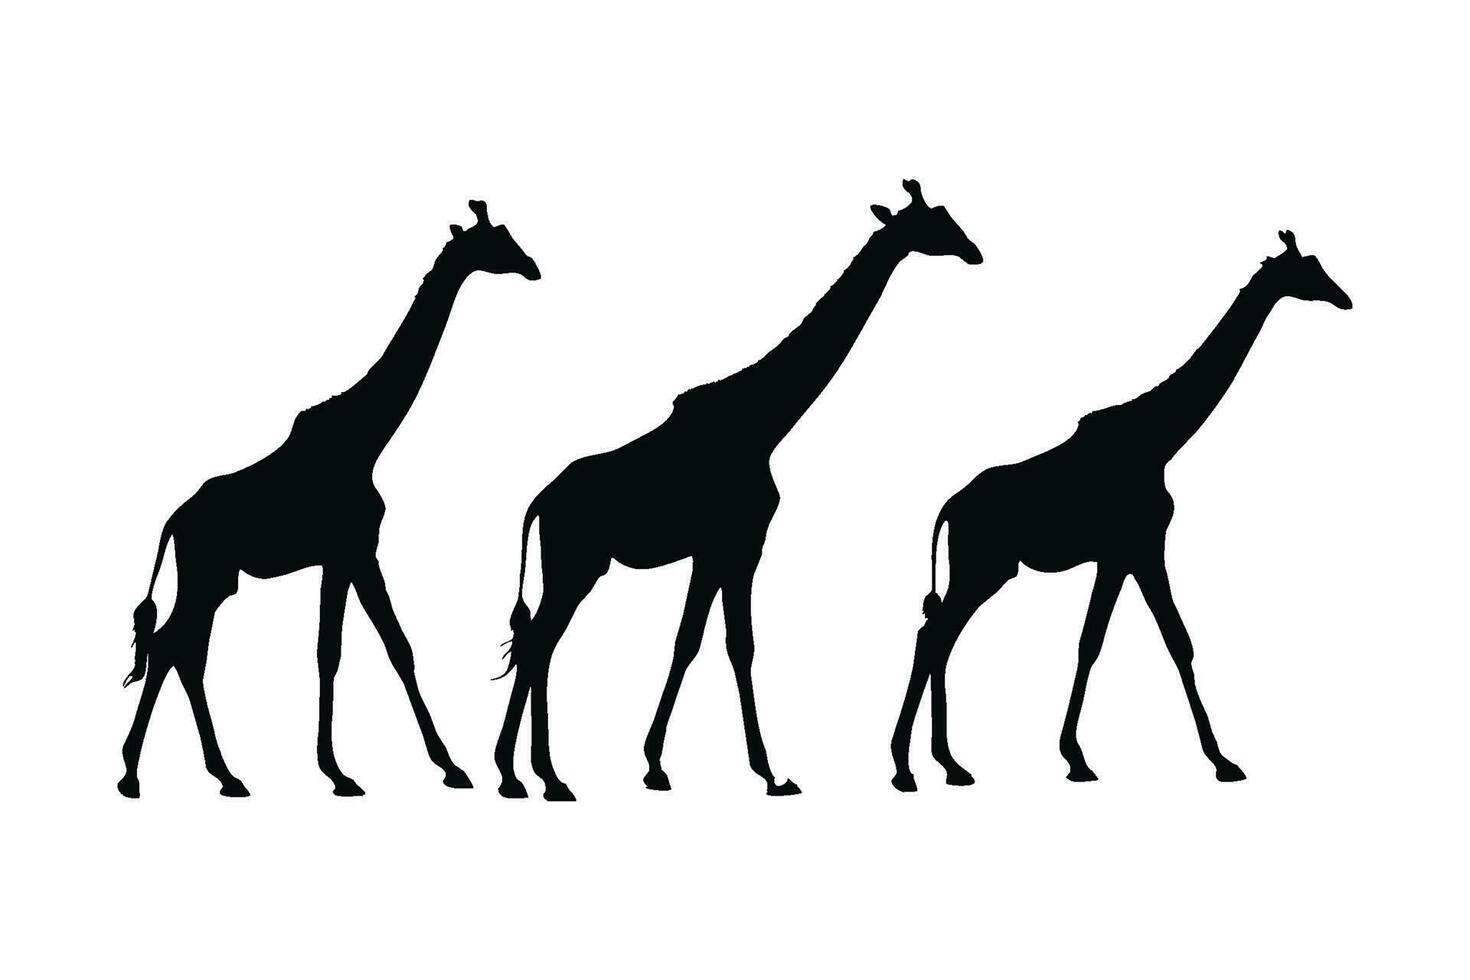 Wild giraffe silhouette set on a white background. Herbivorous wild giraffe silhouette bundle design. Camelopard standing and walking in different positions. Giraffe full body silhouette collection. vector